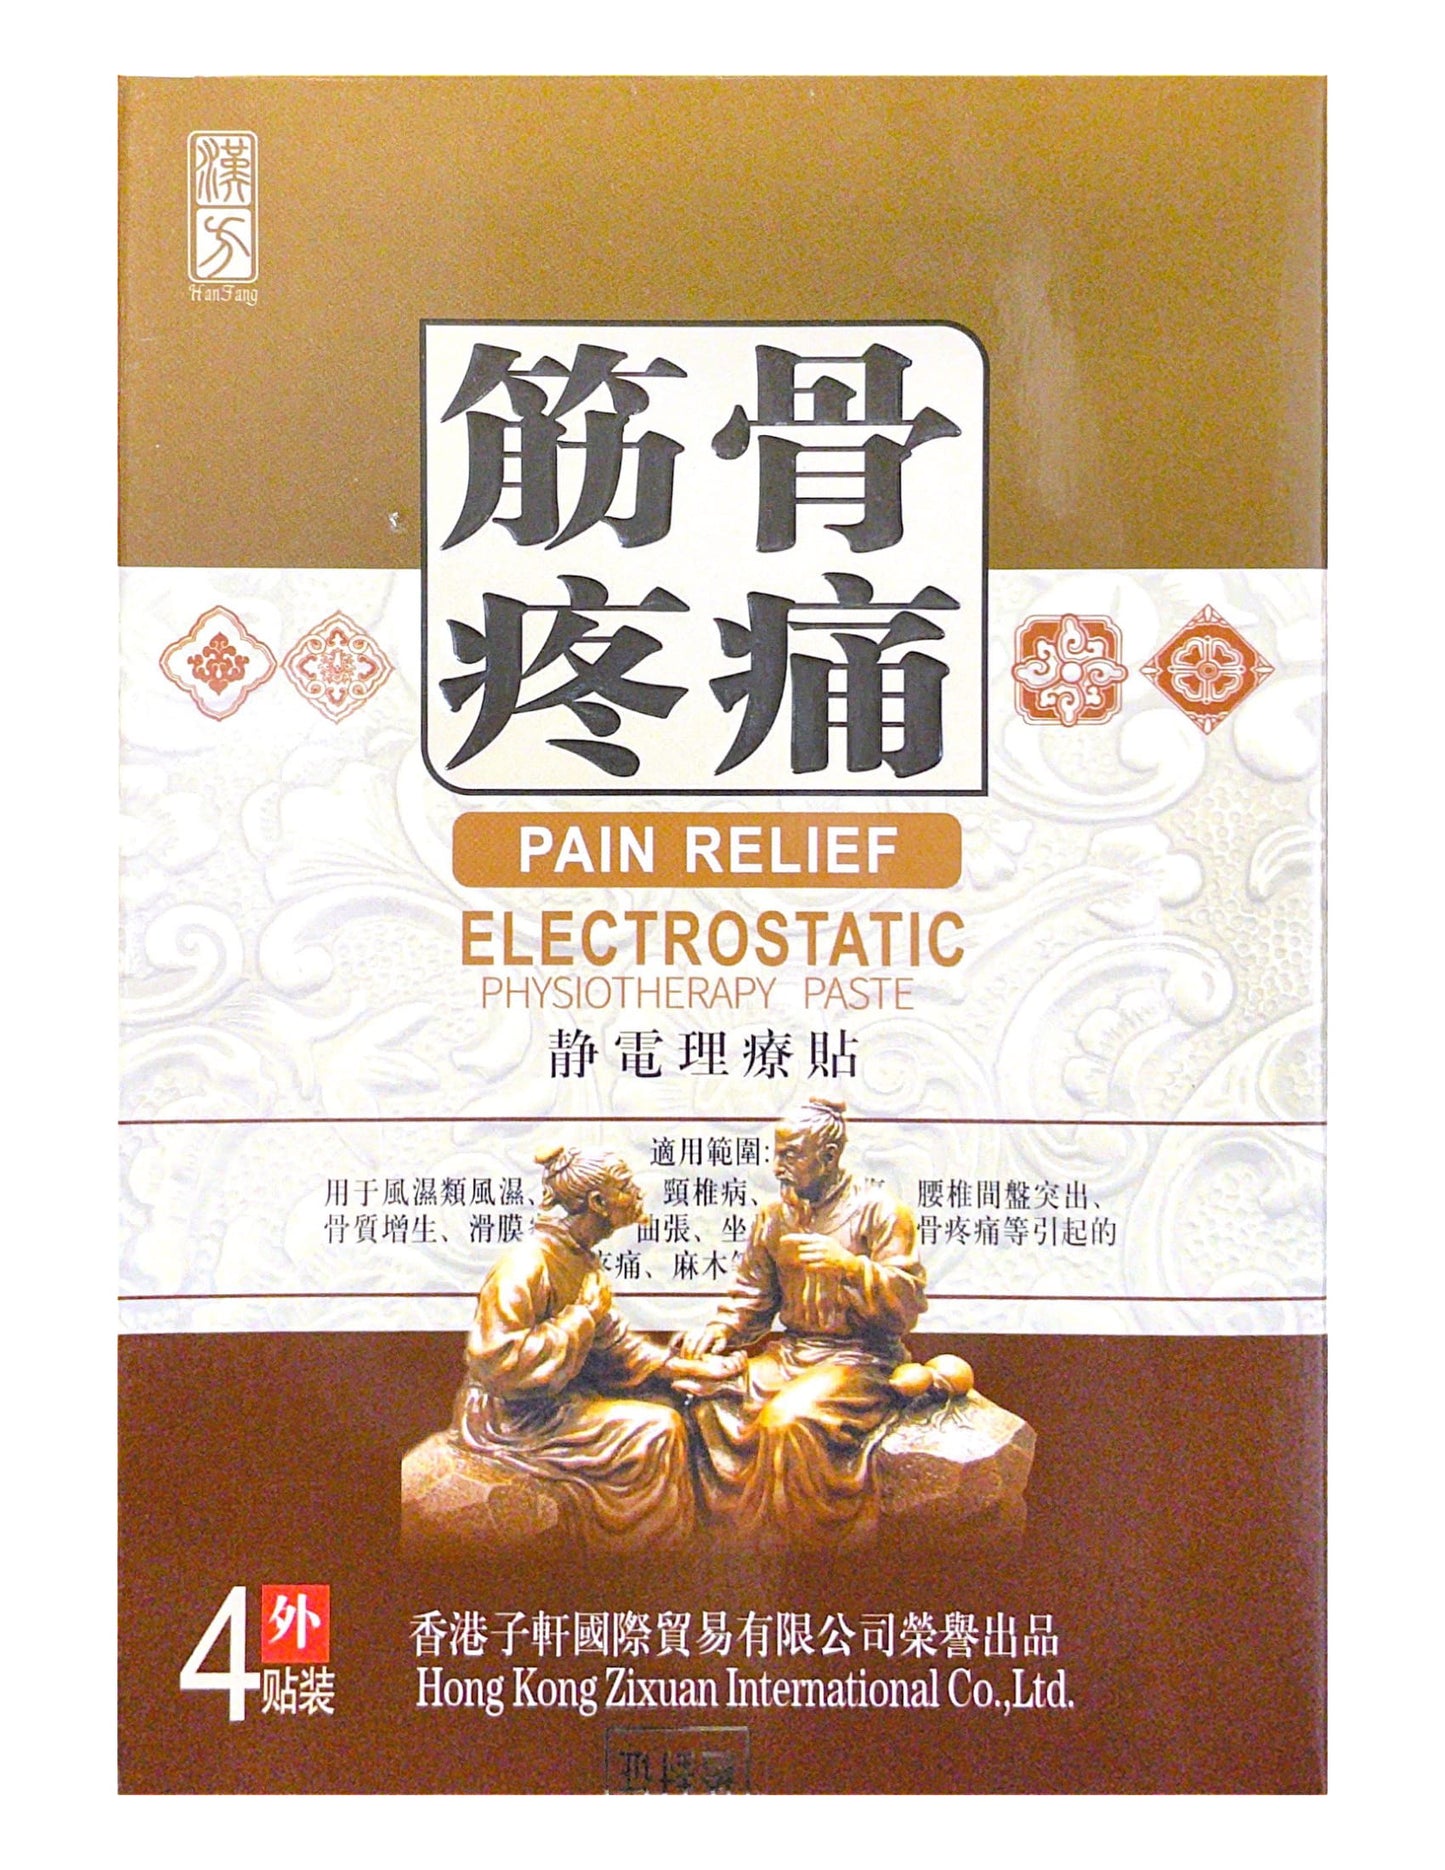 Han Fang Pain Relief Electrostatic Physiotherapy Paste 汉方筋骨疼痛静电理疗贴 4 Patches